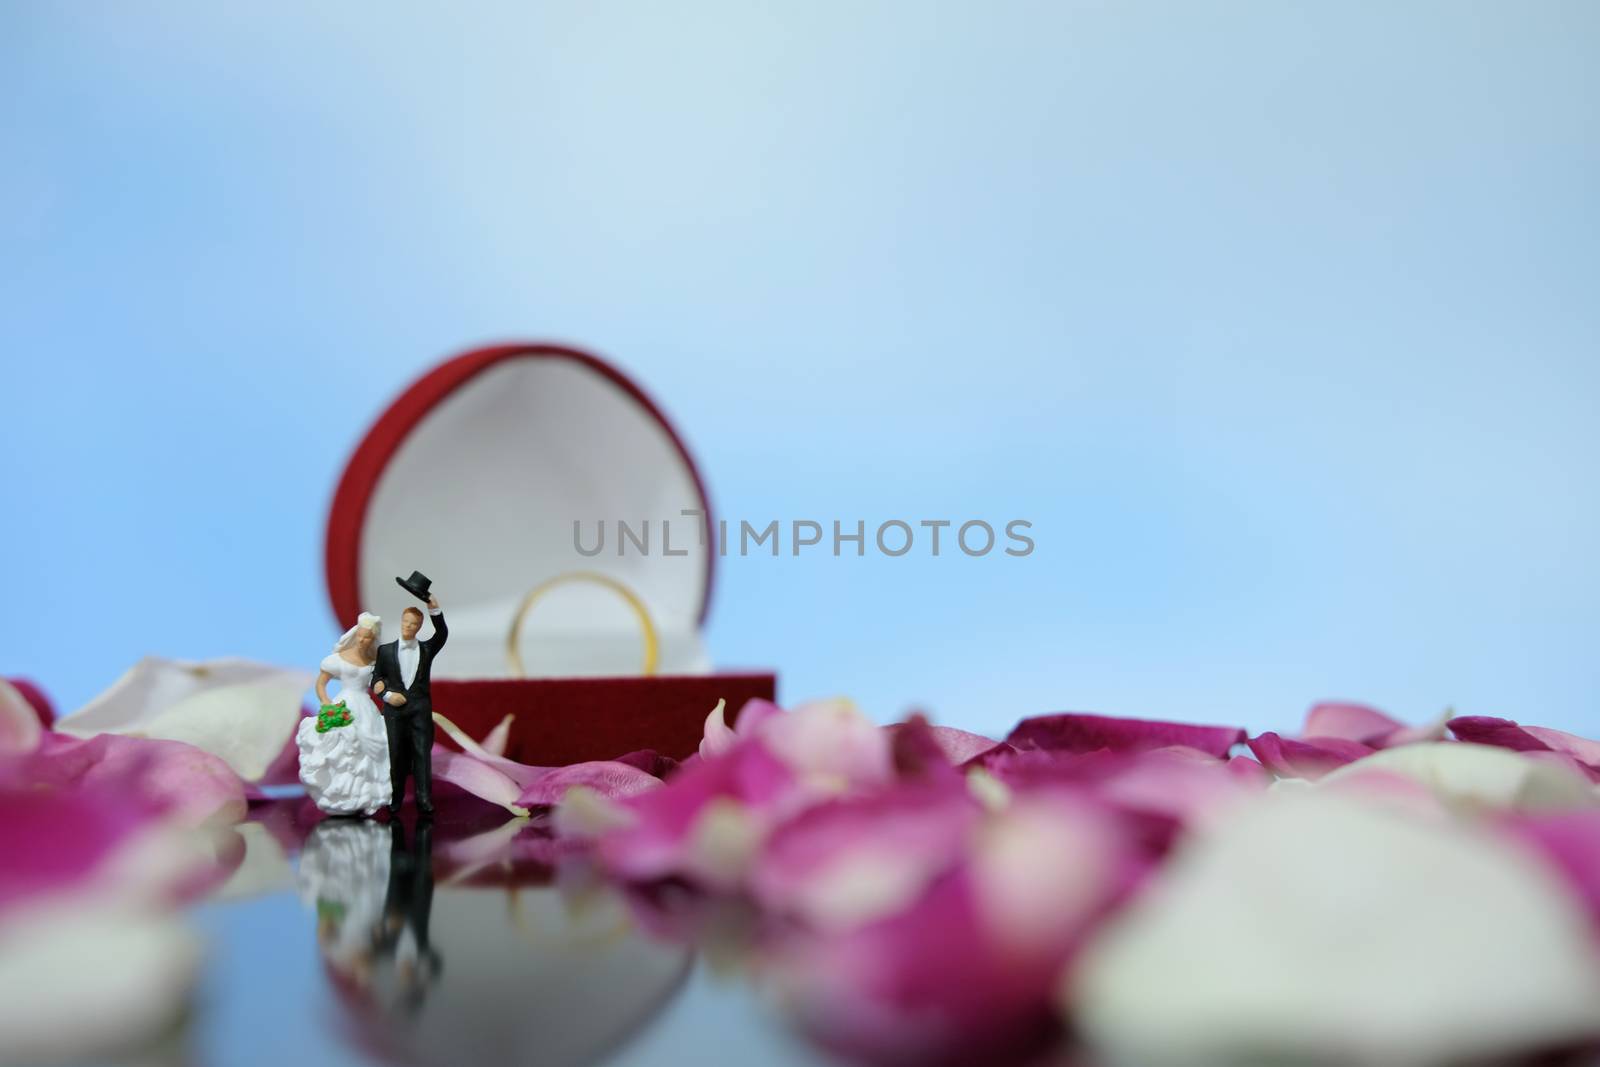 Miniature photography outdoor marriage wedding concept, bride and groom walking in front of opened ring box on red white rose flower pile